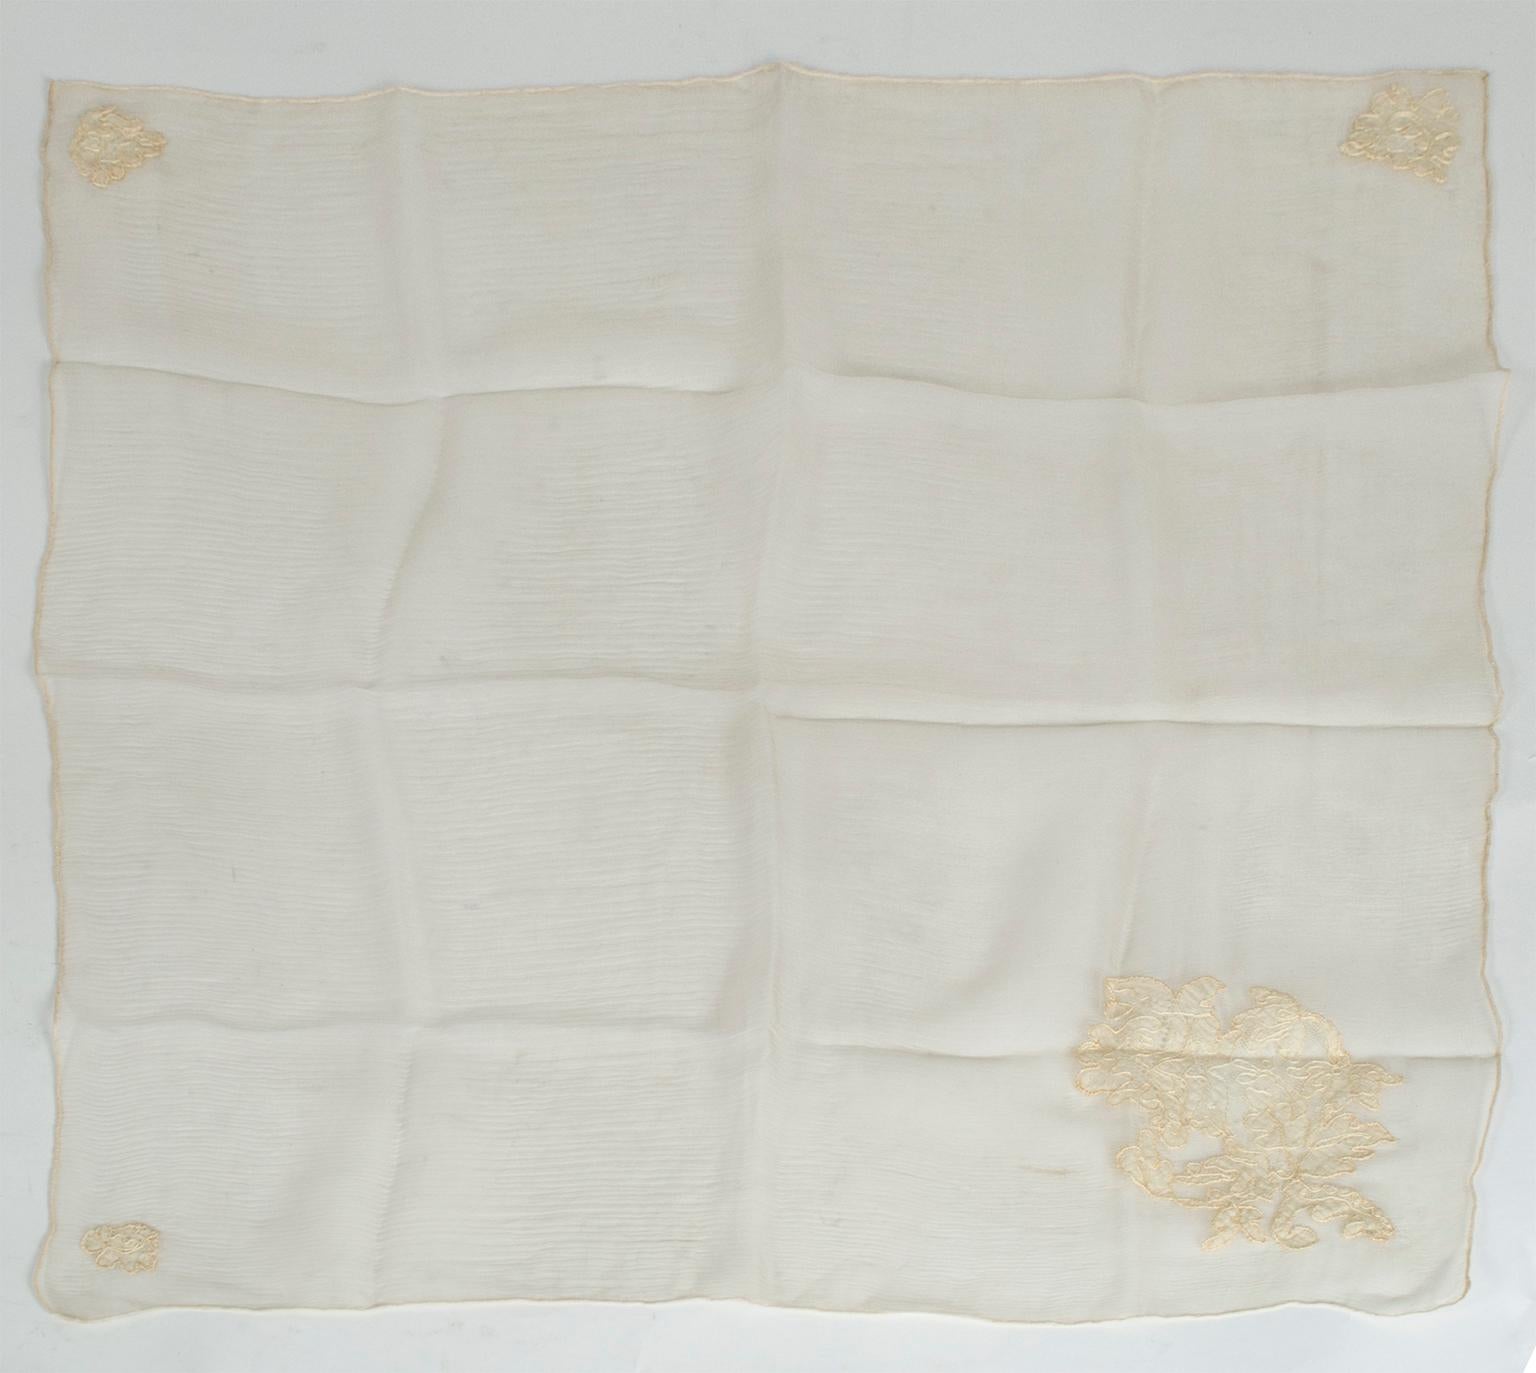 Beige Late Victorian Silk Chiffon Handkerchief with Inset Lace Corners, 1900s